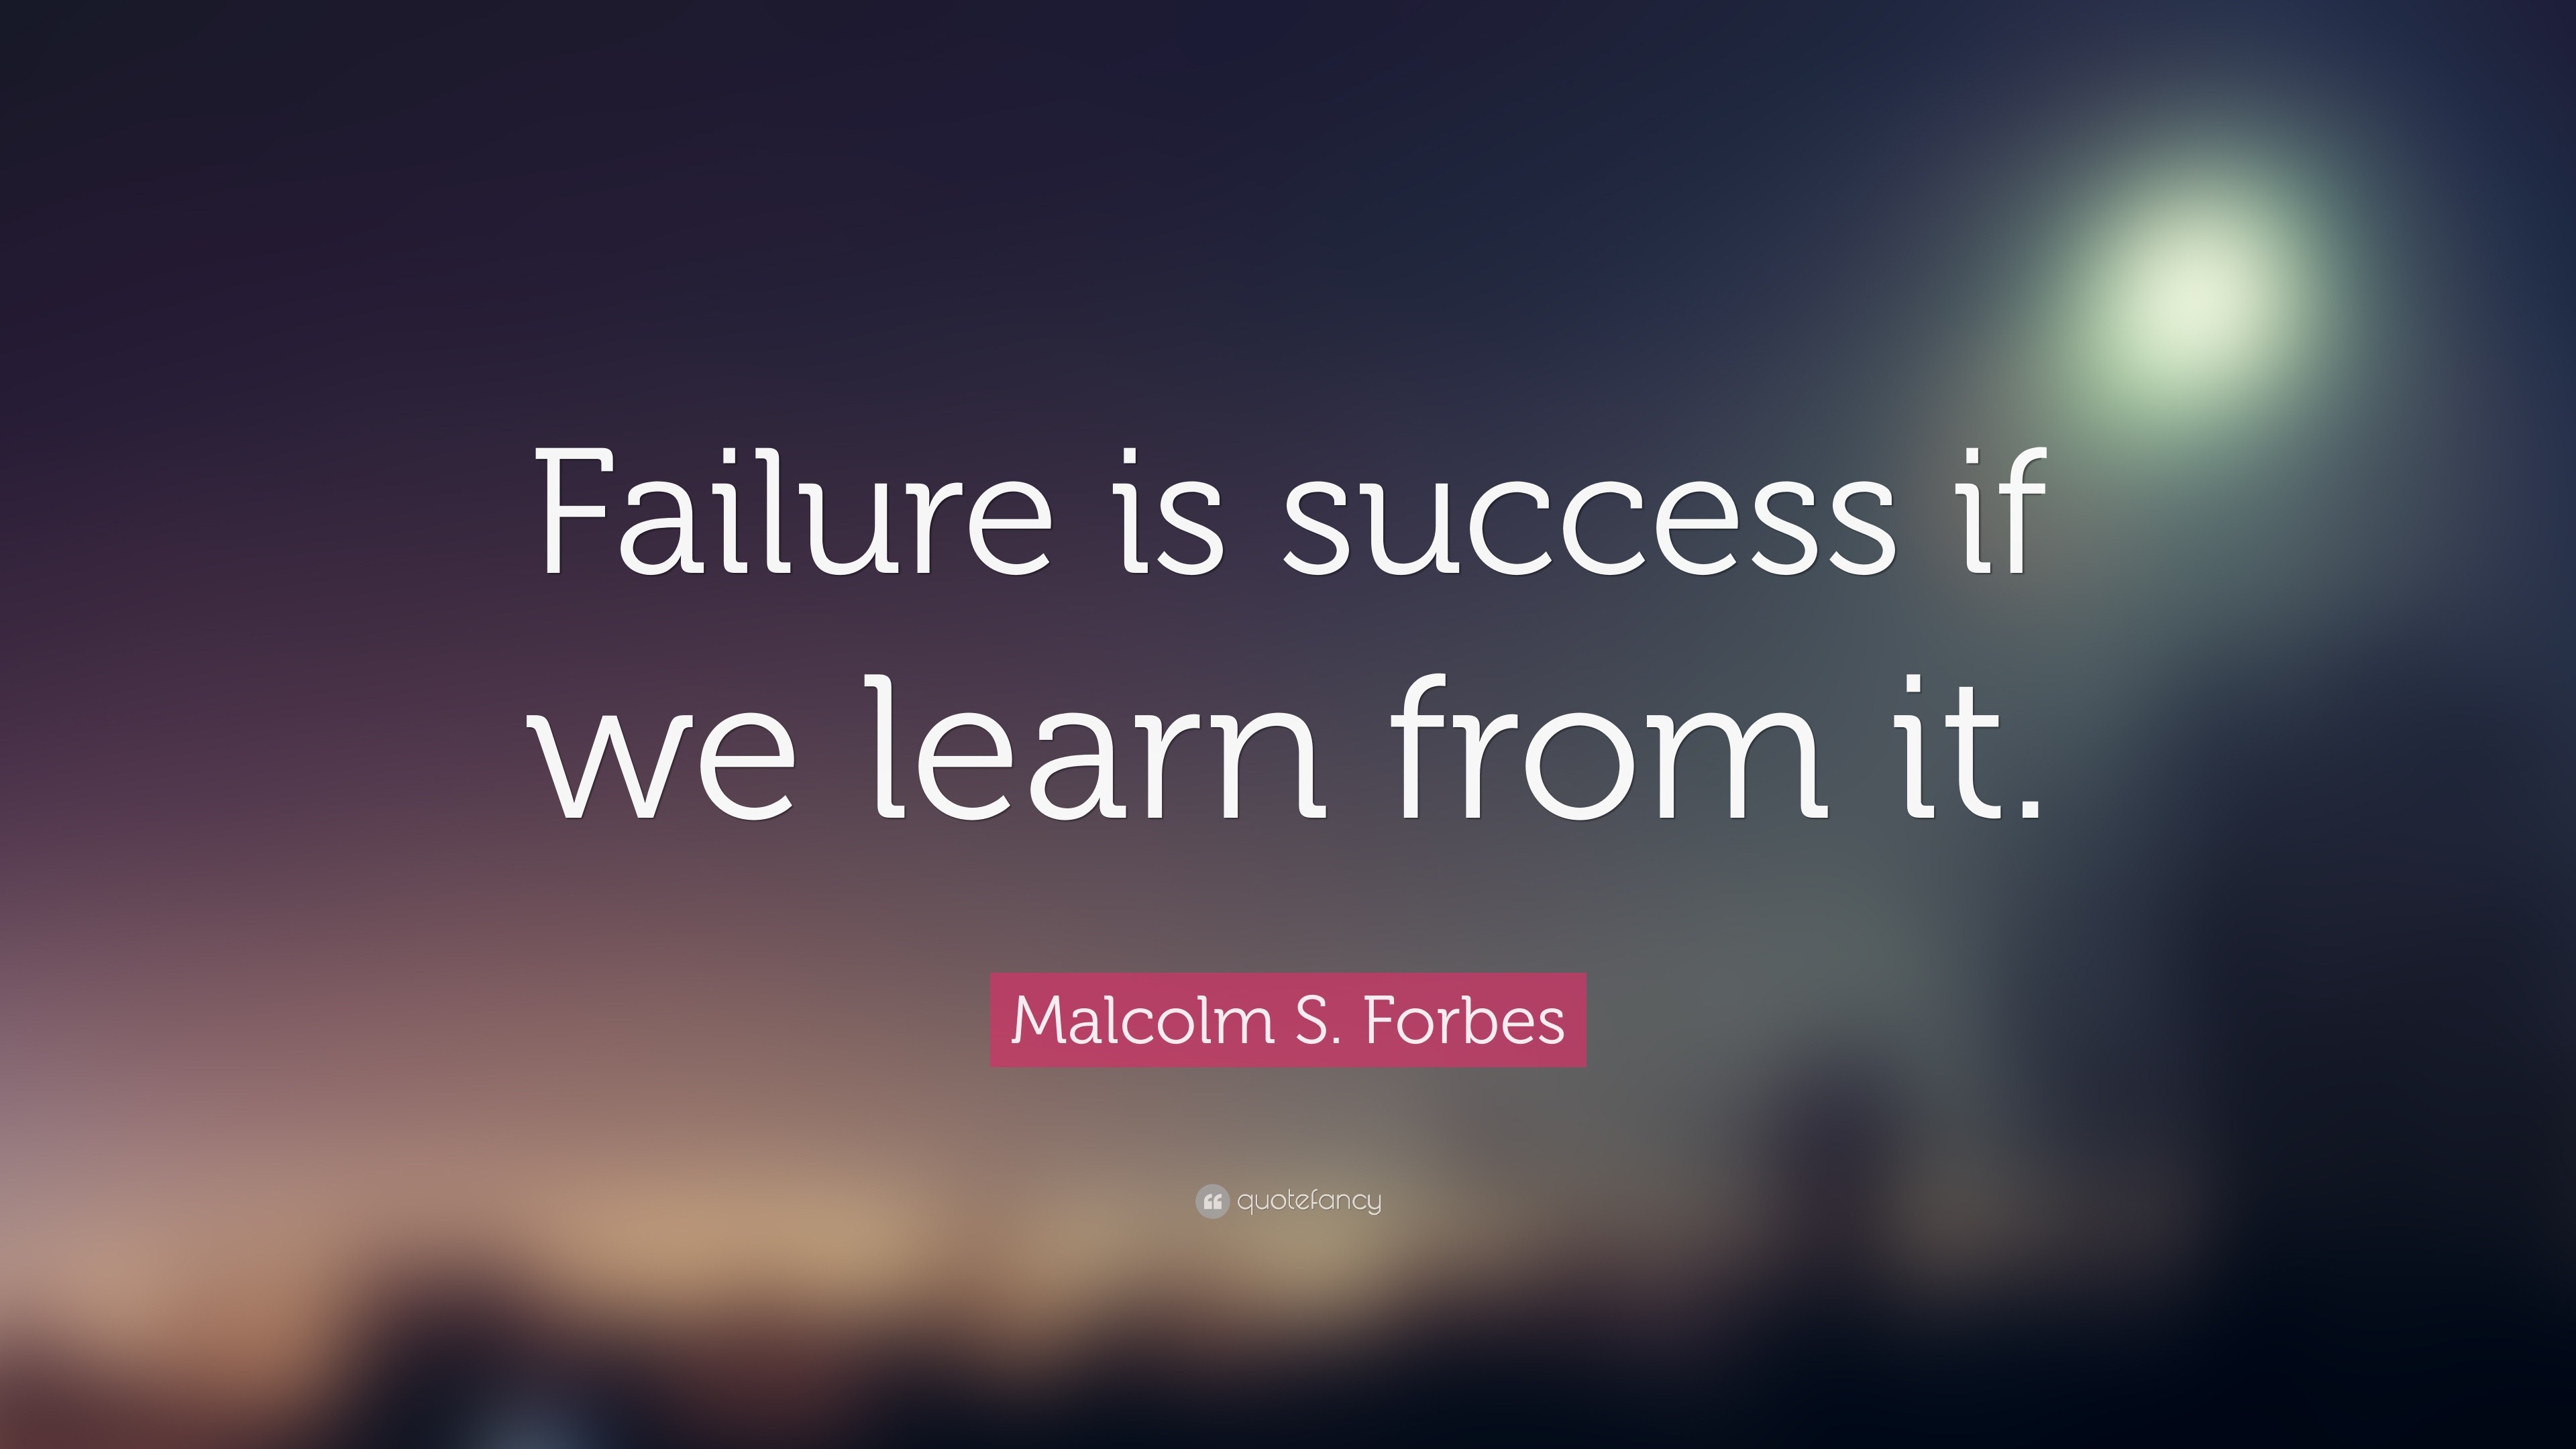 Malcolm S. Forbes Quote: “Failure is success if we learn from it.” (25